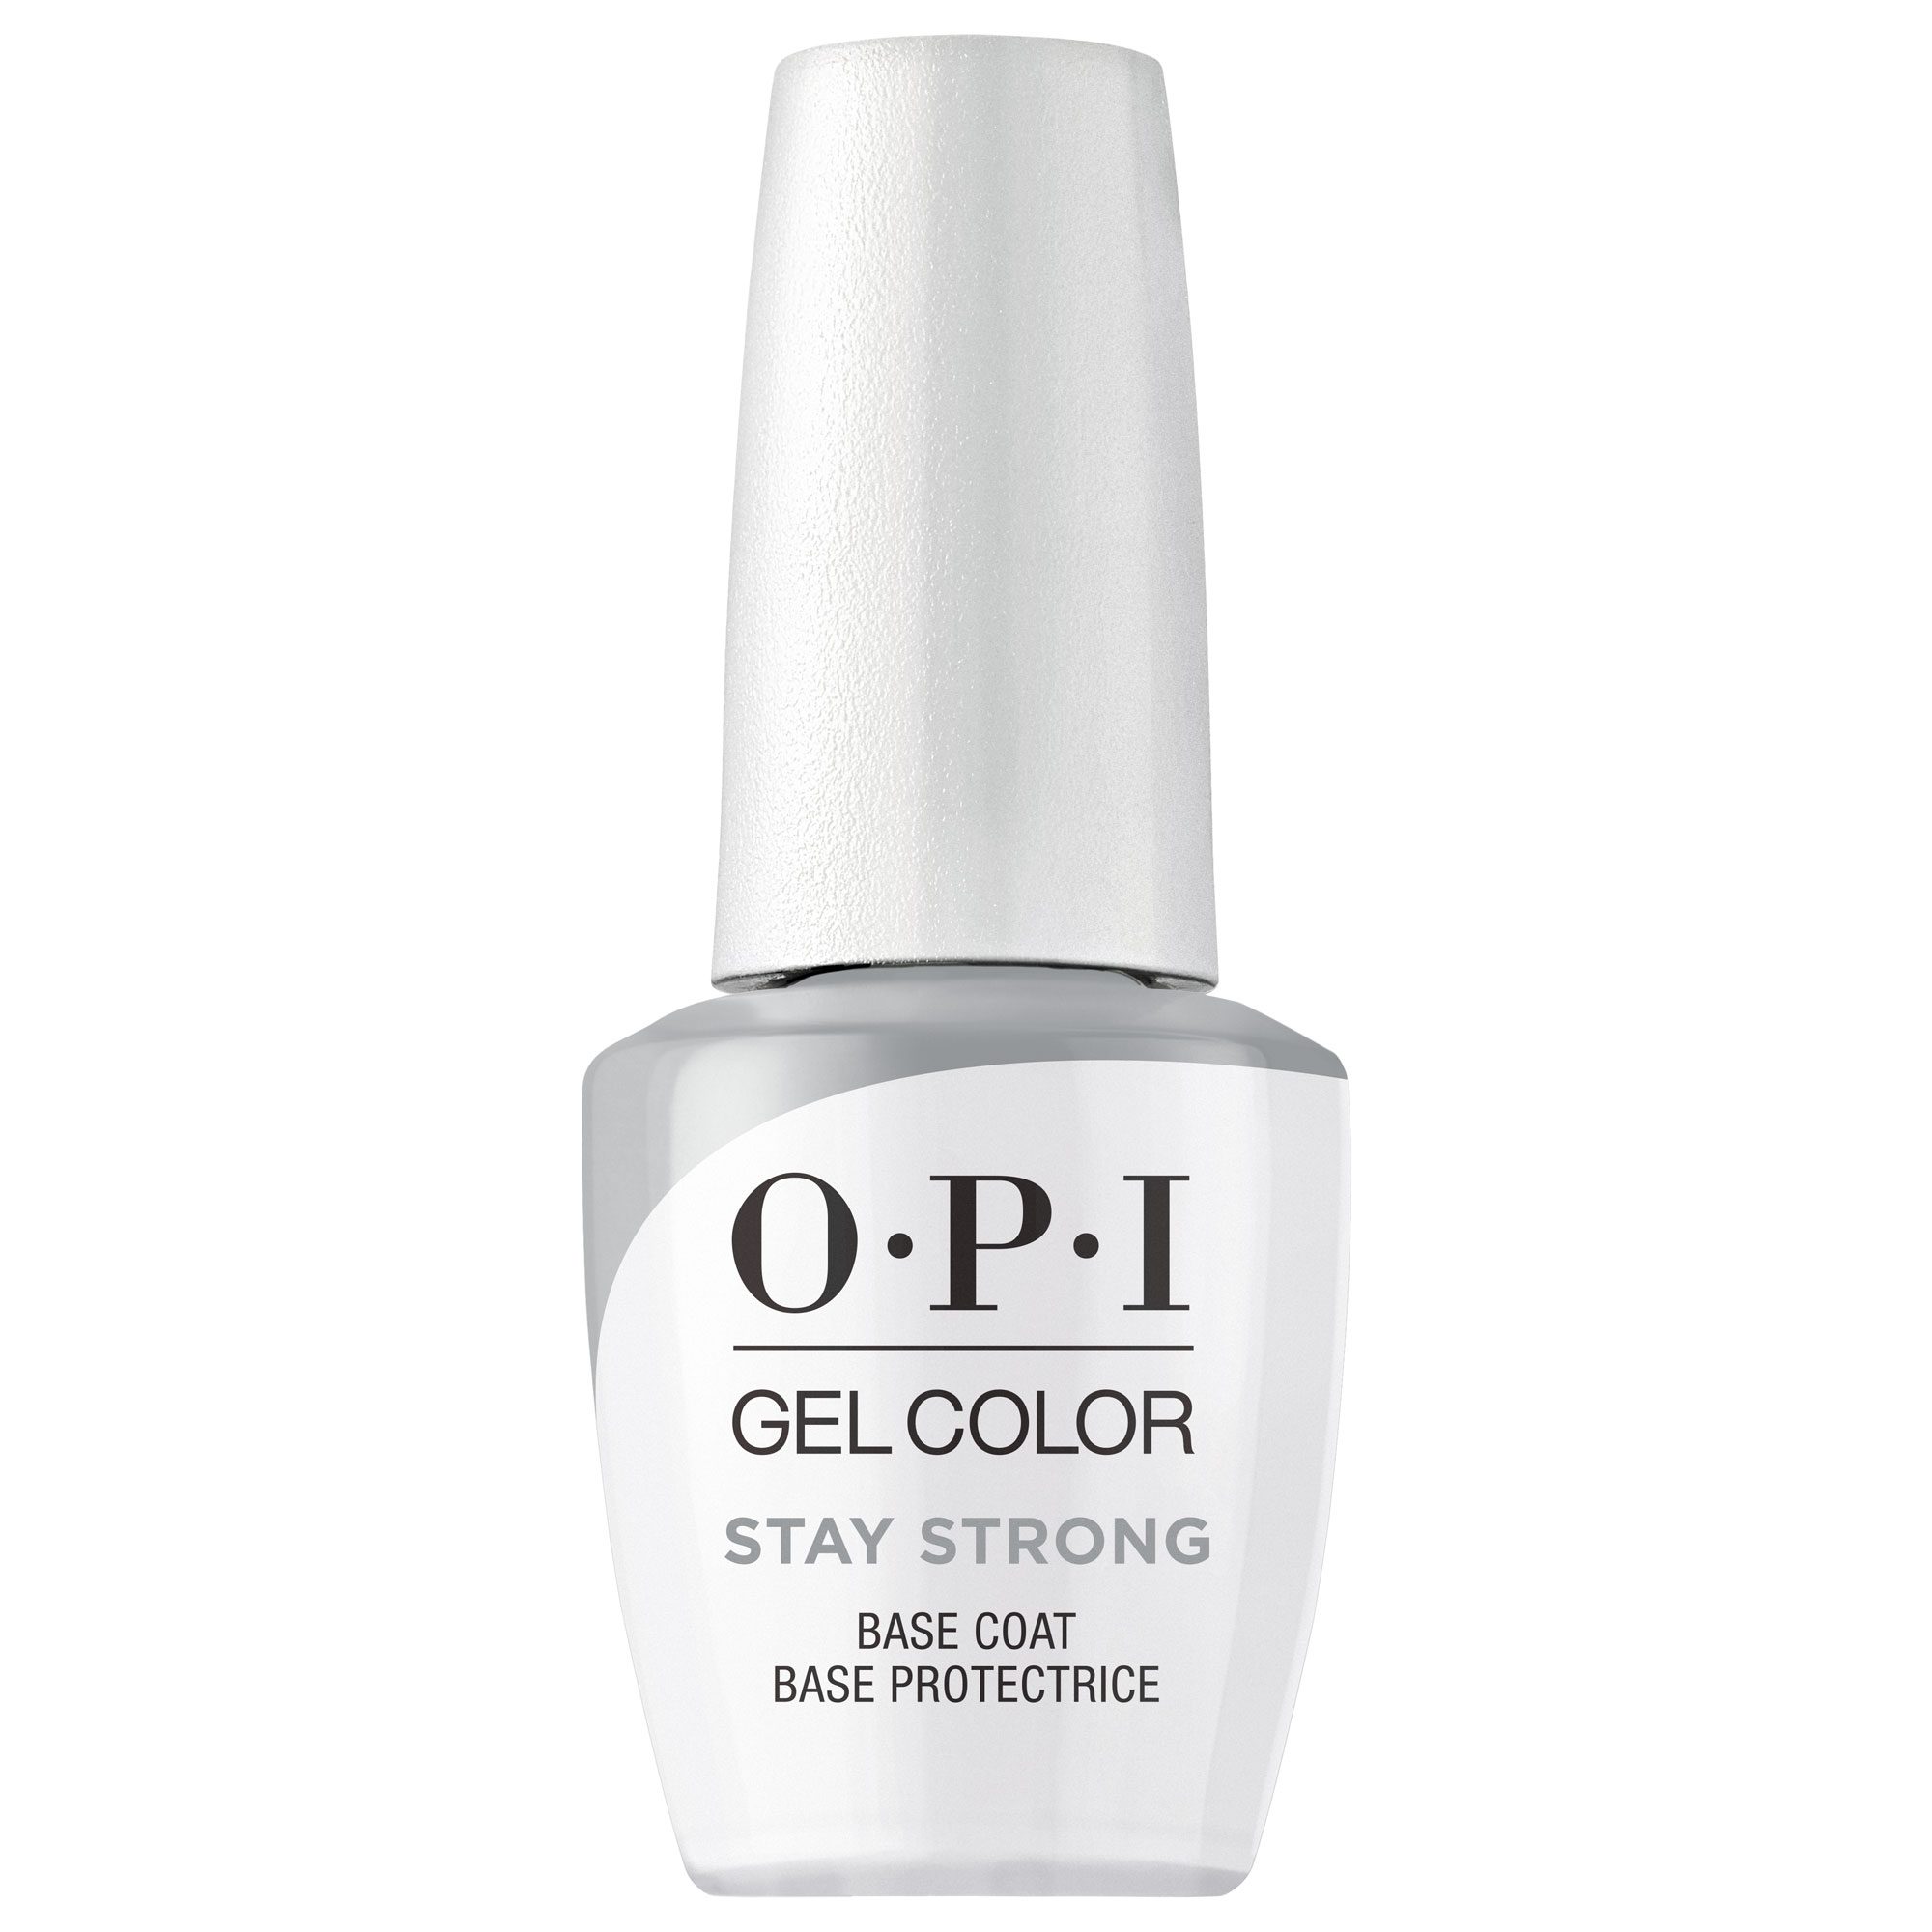 OPI GelColor - Stay Strong Base Coat